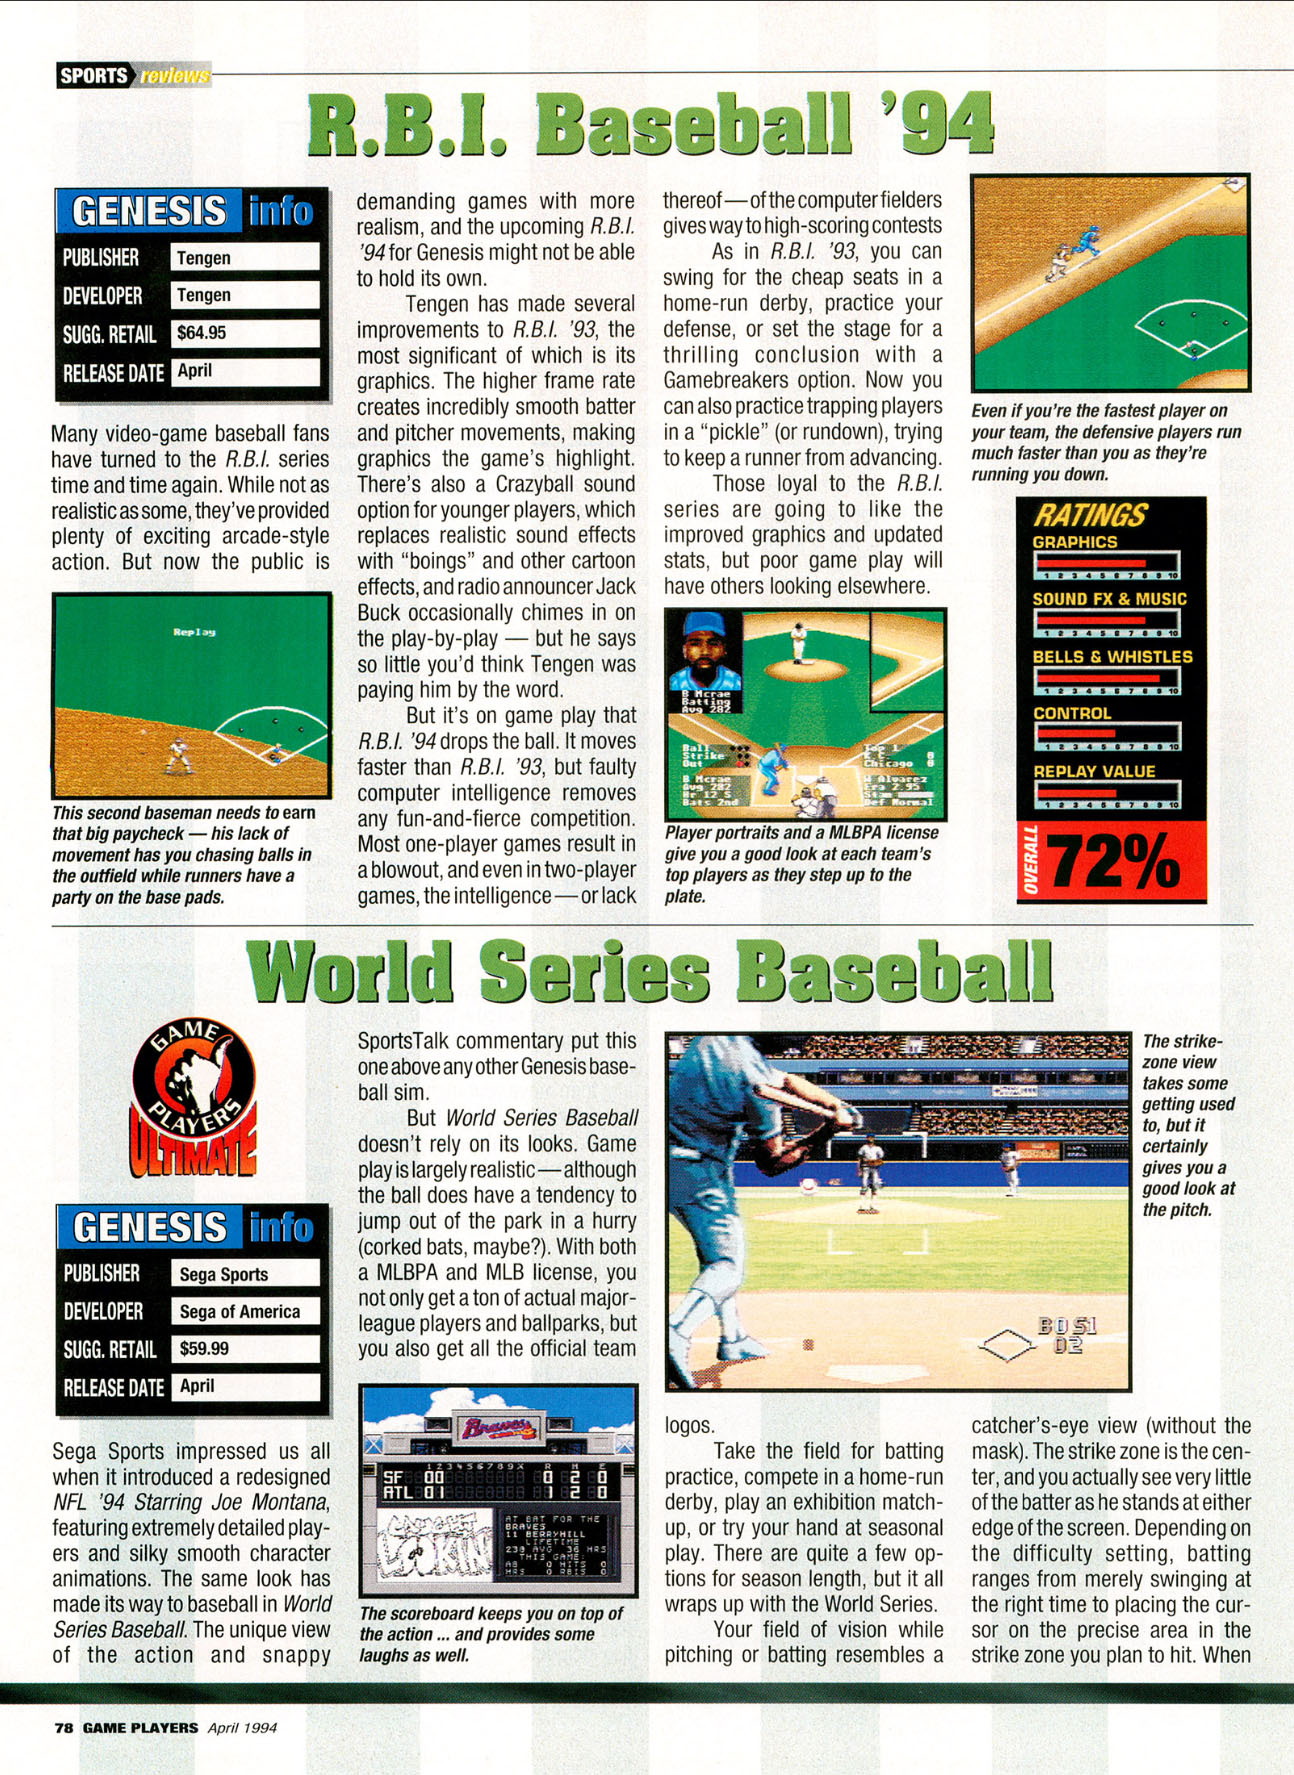 Play Ball!, Game Players April 1994 page 78